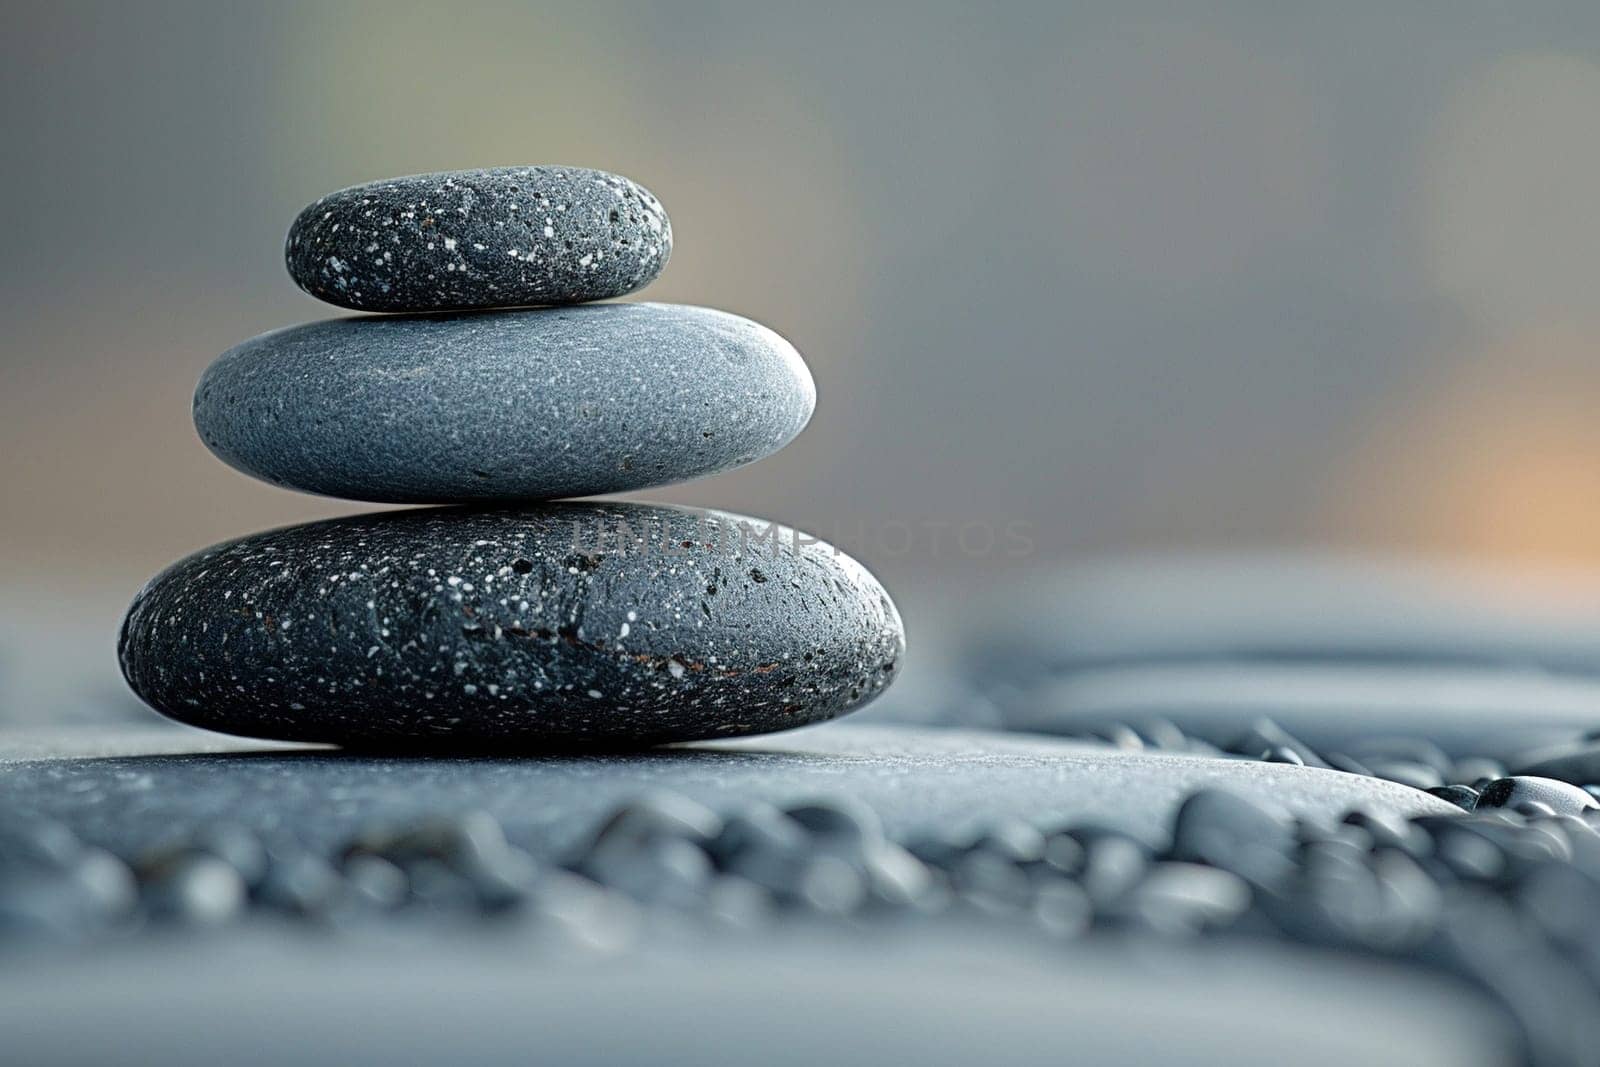 Zen Stones Stacked in Balanced Harmony, The stones blur into one another, creating a tranquil symbol of simplicity and meditation.